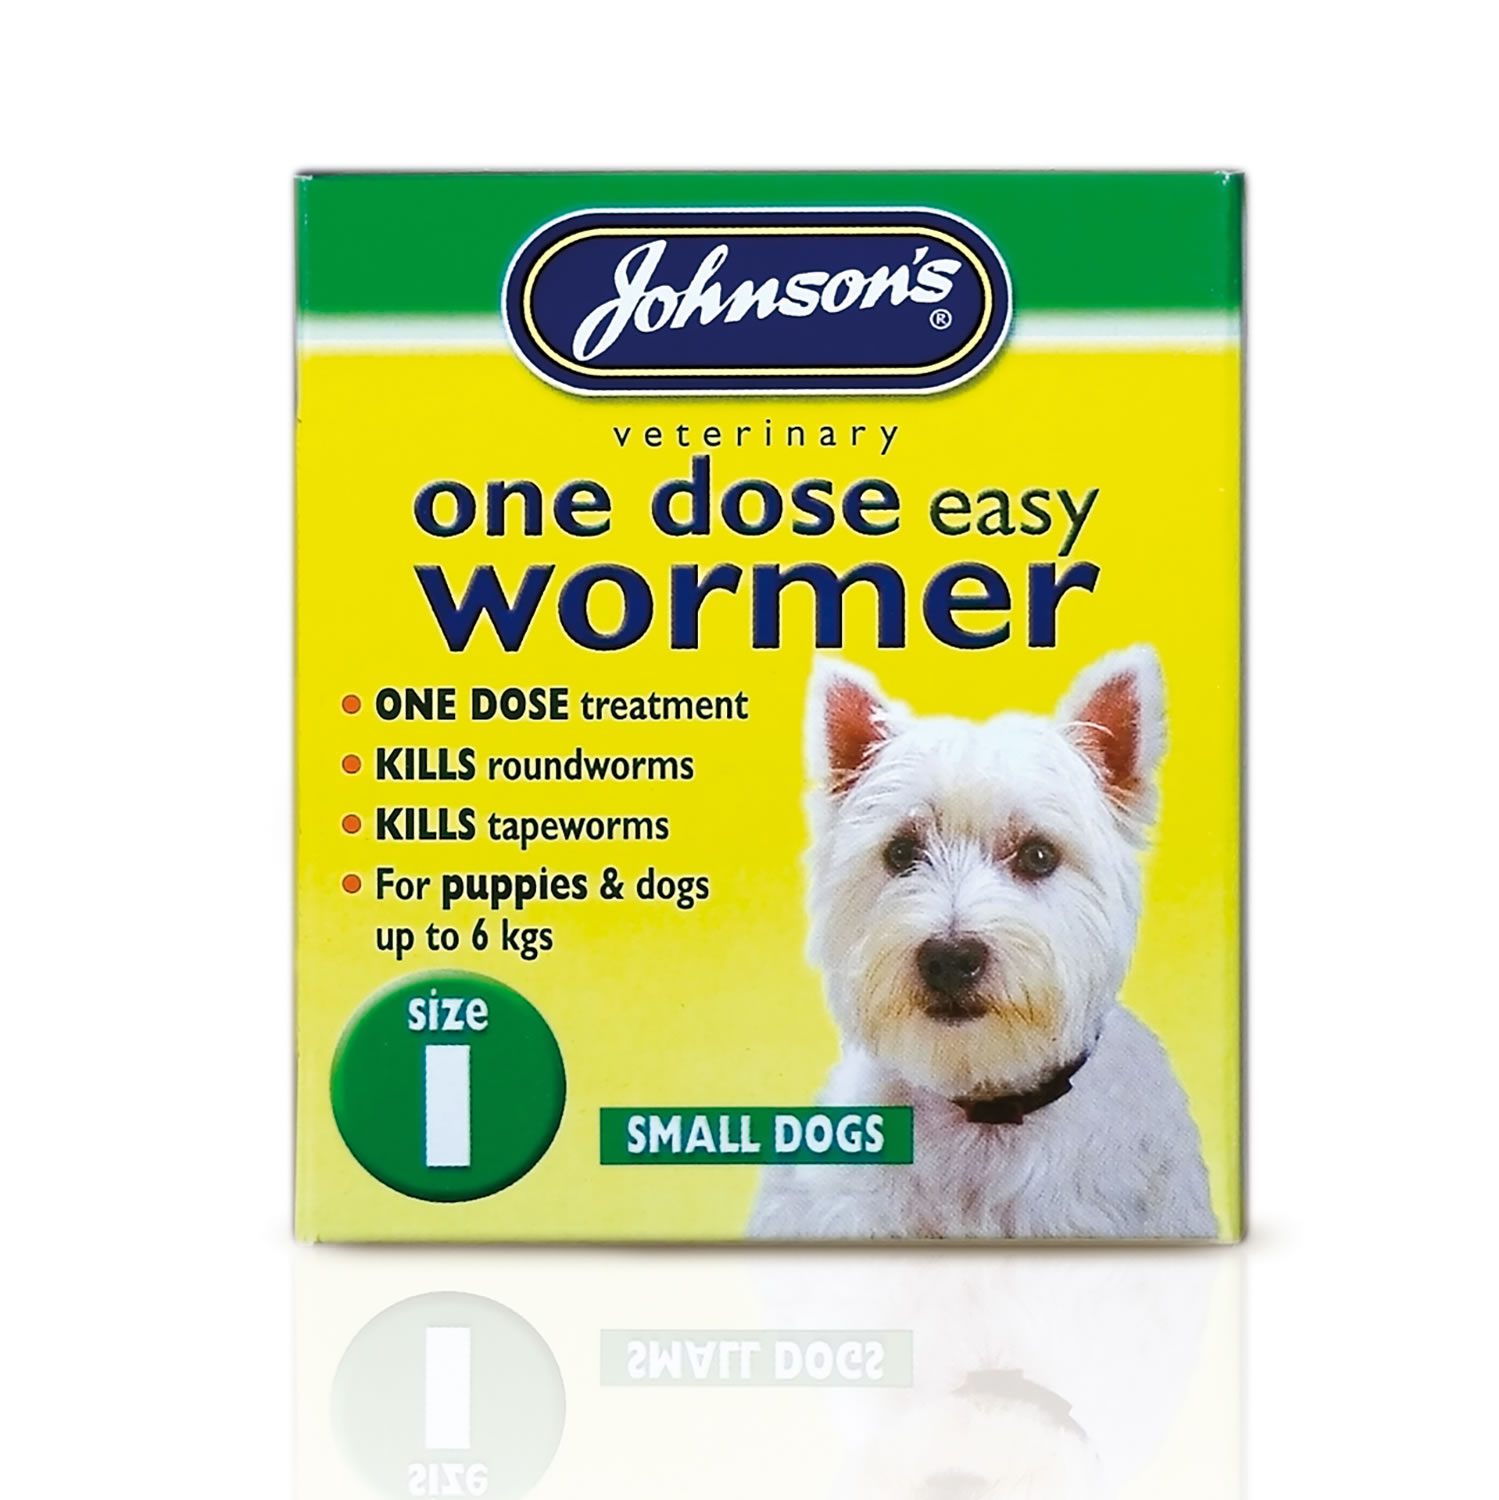 JOHNSON'S VETERINARY EASY WORMER ONE DOSE FOR DOGS SIZE ONE  EACH 4 TABLETS